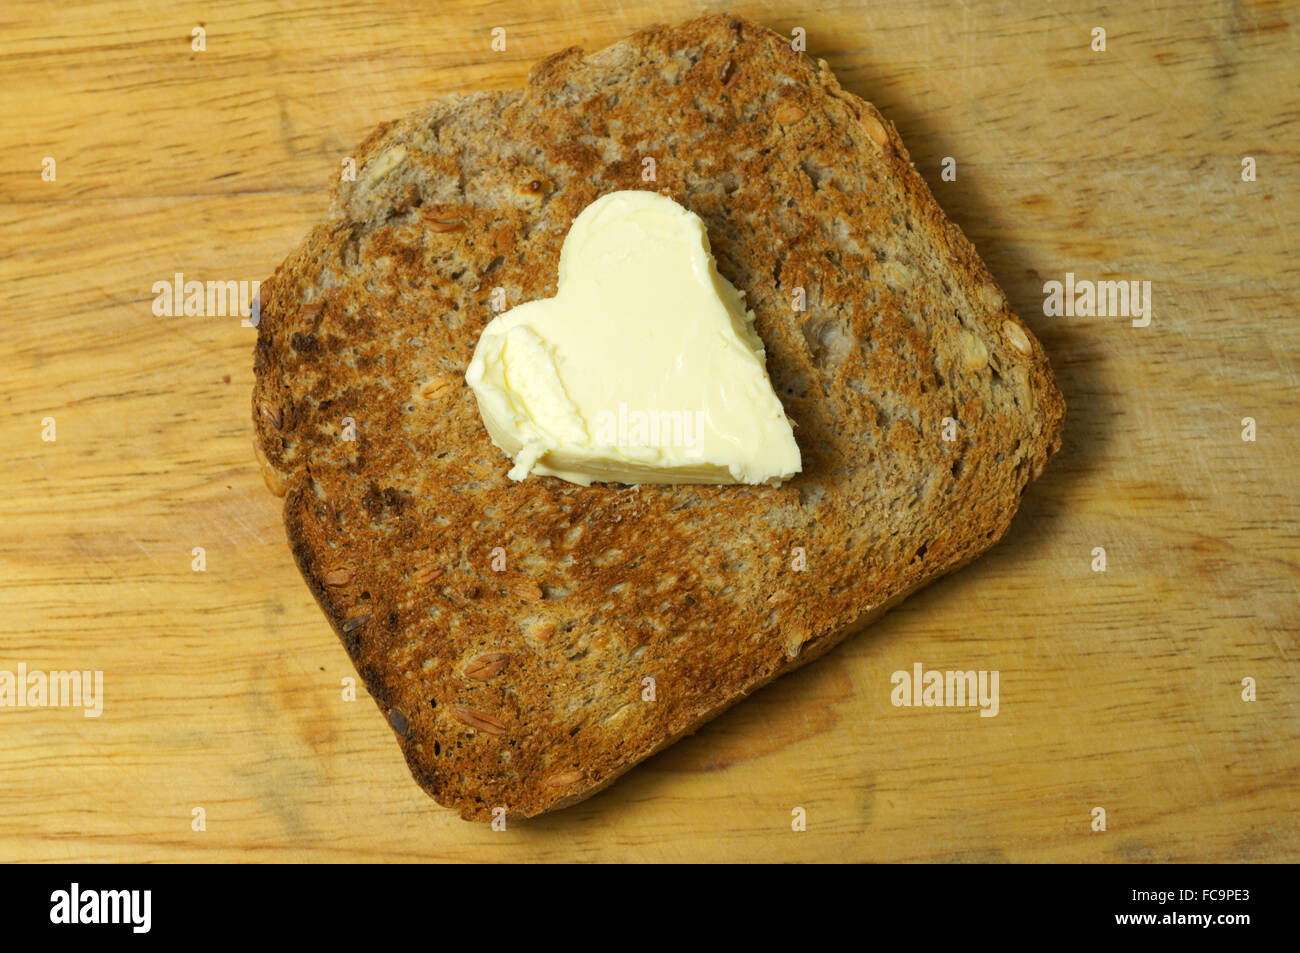 Hot toast and butter. Stock Photo